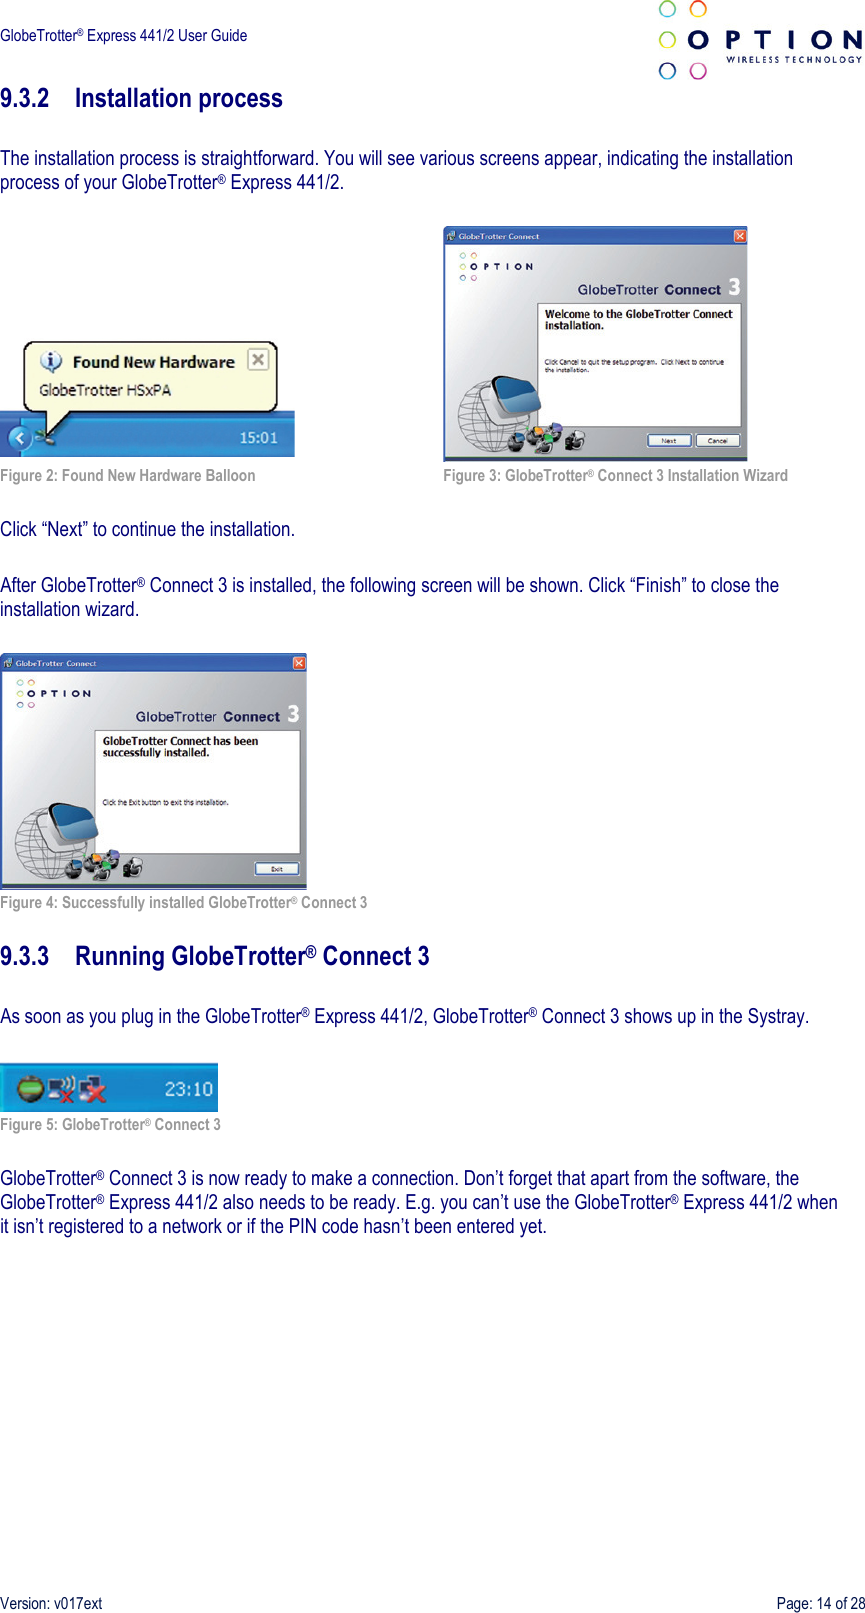  GlobeTrotter® Express 441/2 User Guide    Version: v017ext  Page: 14 of 28 9.3.2 Installation process  The installation process is straightforward. You will see various screens appear, indicating the installation process of your GlobeTrotter® Express 441/2.        Figure 2: Found New Hardware Balloon  Figure 3: GlobeTrotter® Connect 3 Installation Wizard  Click “Next” to continue the installation.  After GlobeTrotter® Connect 3 is installed, the following screen will be shown. Click “Finish” to close the installation wizard.   Figure 4: Successfully installed GlobeTrotter® Connect 3  9.3.3 Running GlobeTrotter® Connect 3  As soon as you plug in the GlobeTrotter® Express 441/2, GlobeTrotter® Connect 3 shows up in the Systray.   Figure 5: GlobeTrotter® Connect 3   GlobeTrotter® Connect 3 is now ready to make a connection. Don’t forget that apart from the software, the GlobeTrotter® Express 441/2 also needs to be ready. E.g. you can’t use the GlobeTrotter® Express 441/2 when it isn’t registered to a network or if the PIN code hasn’t been entered yet. 